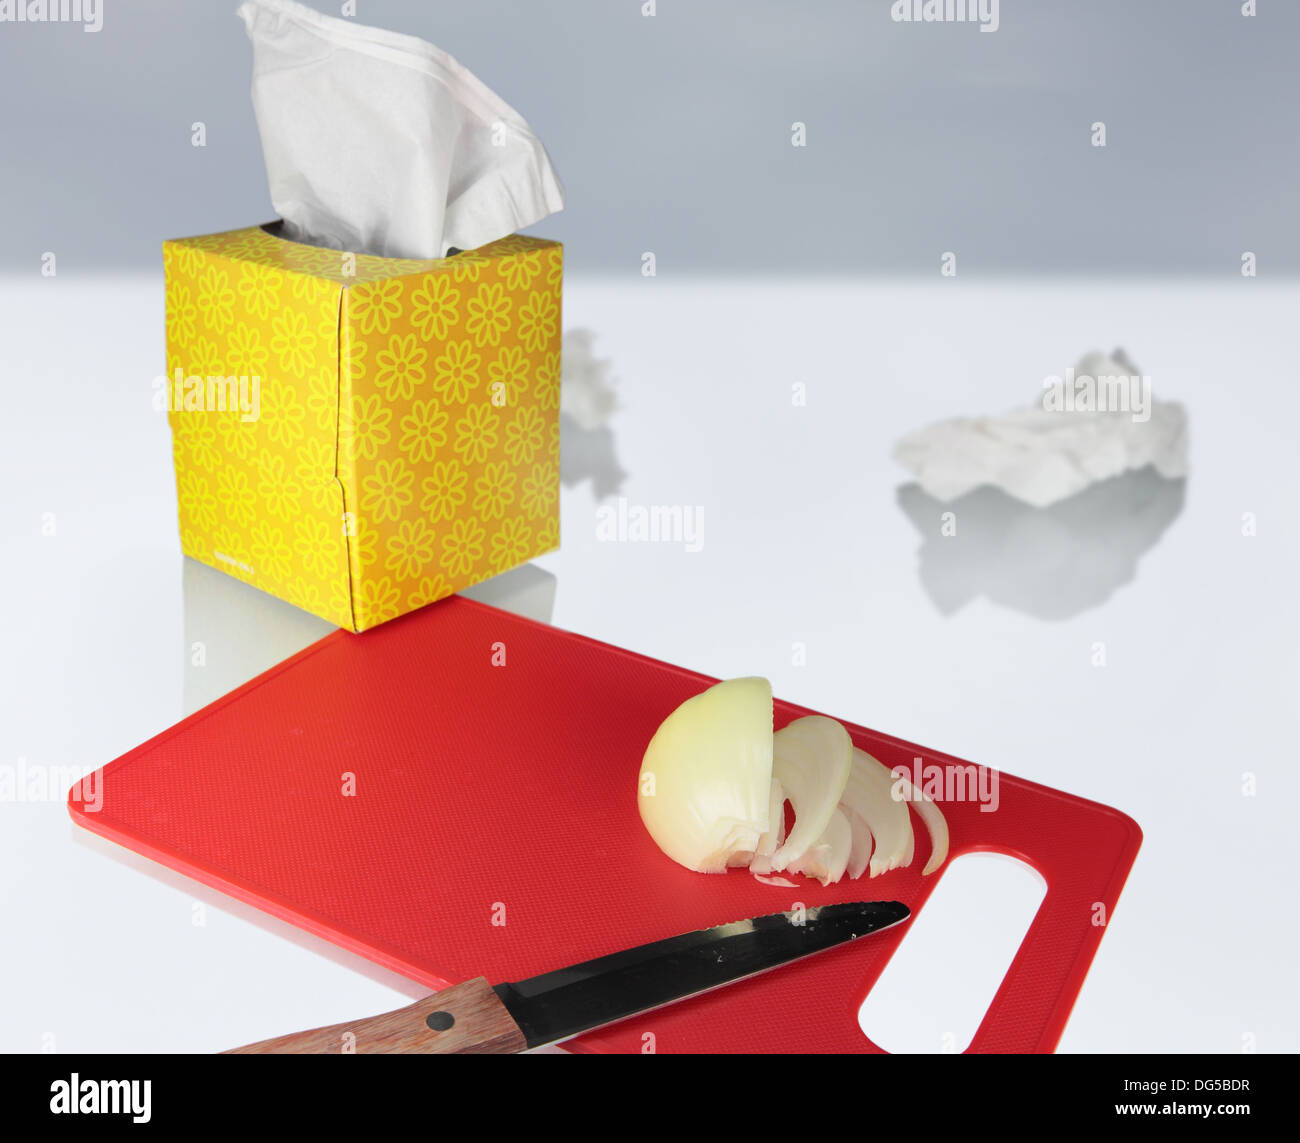 we see slices of an onion on a cutting board and a knife, a crumpled tissue, and  a box of tissues nearby Stock Photo